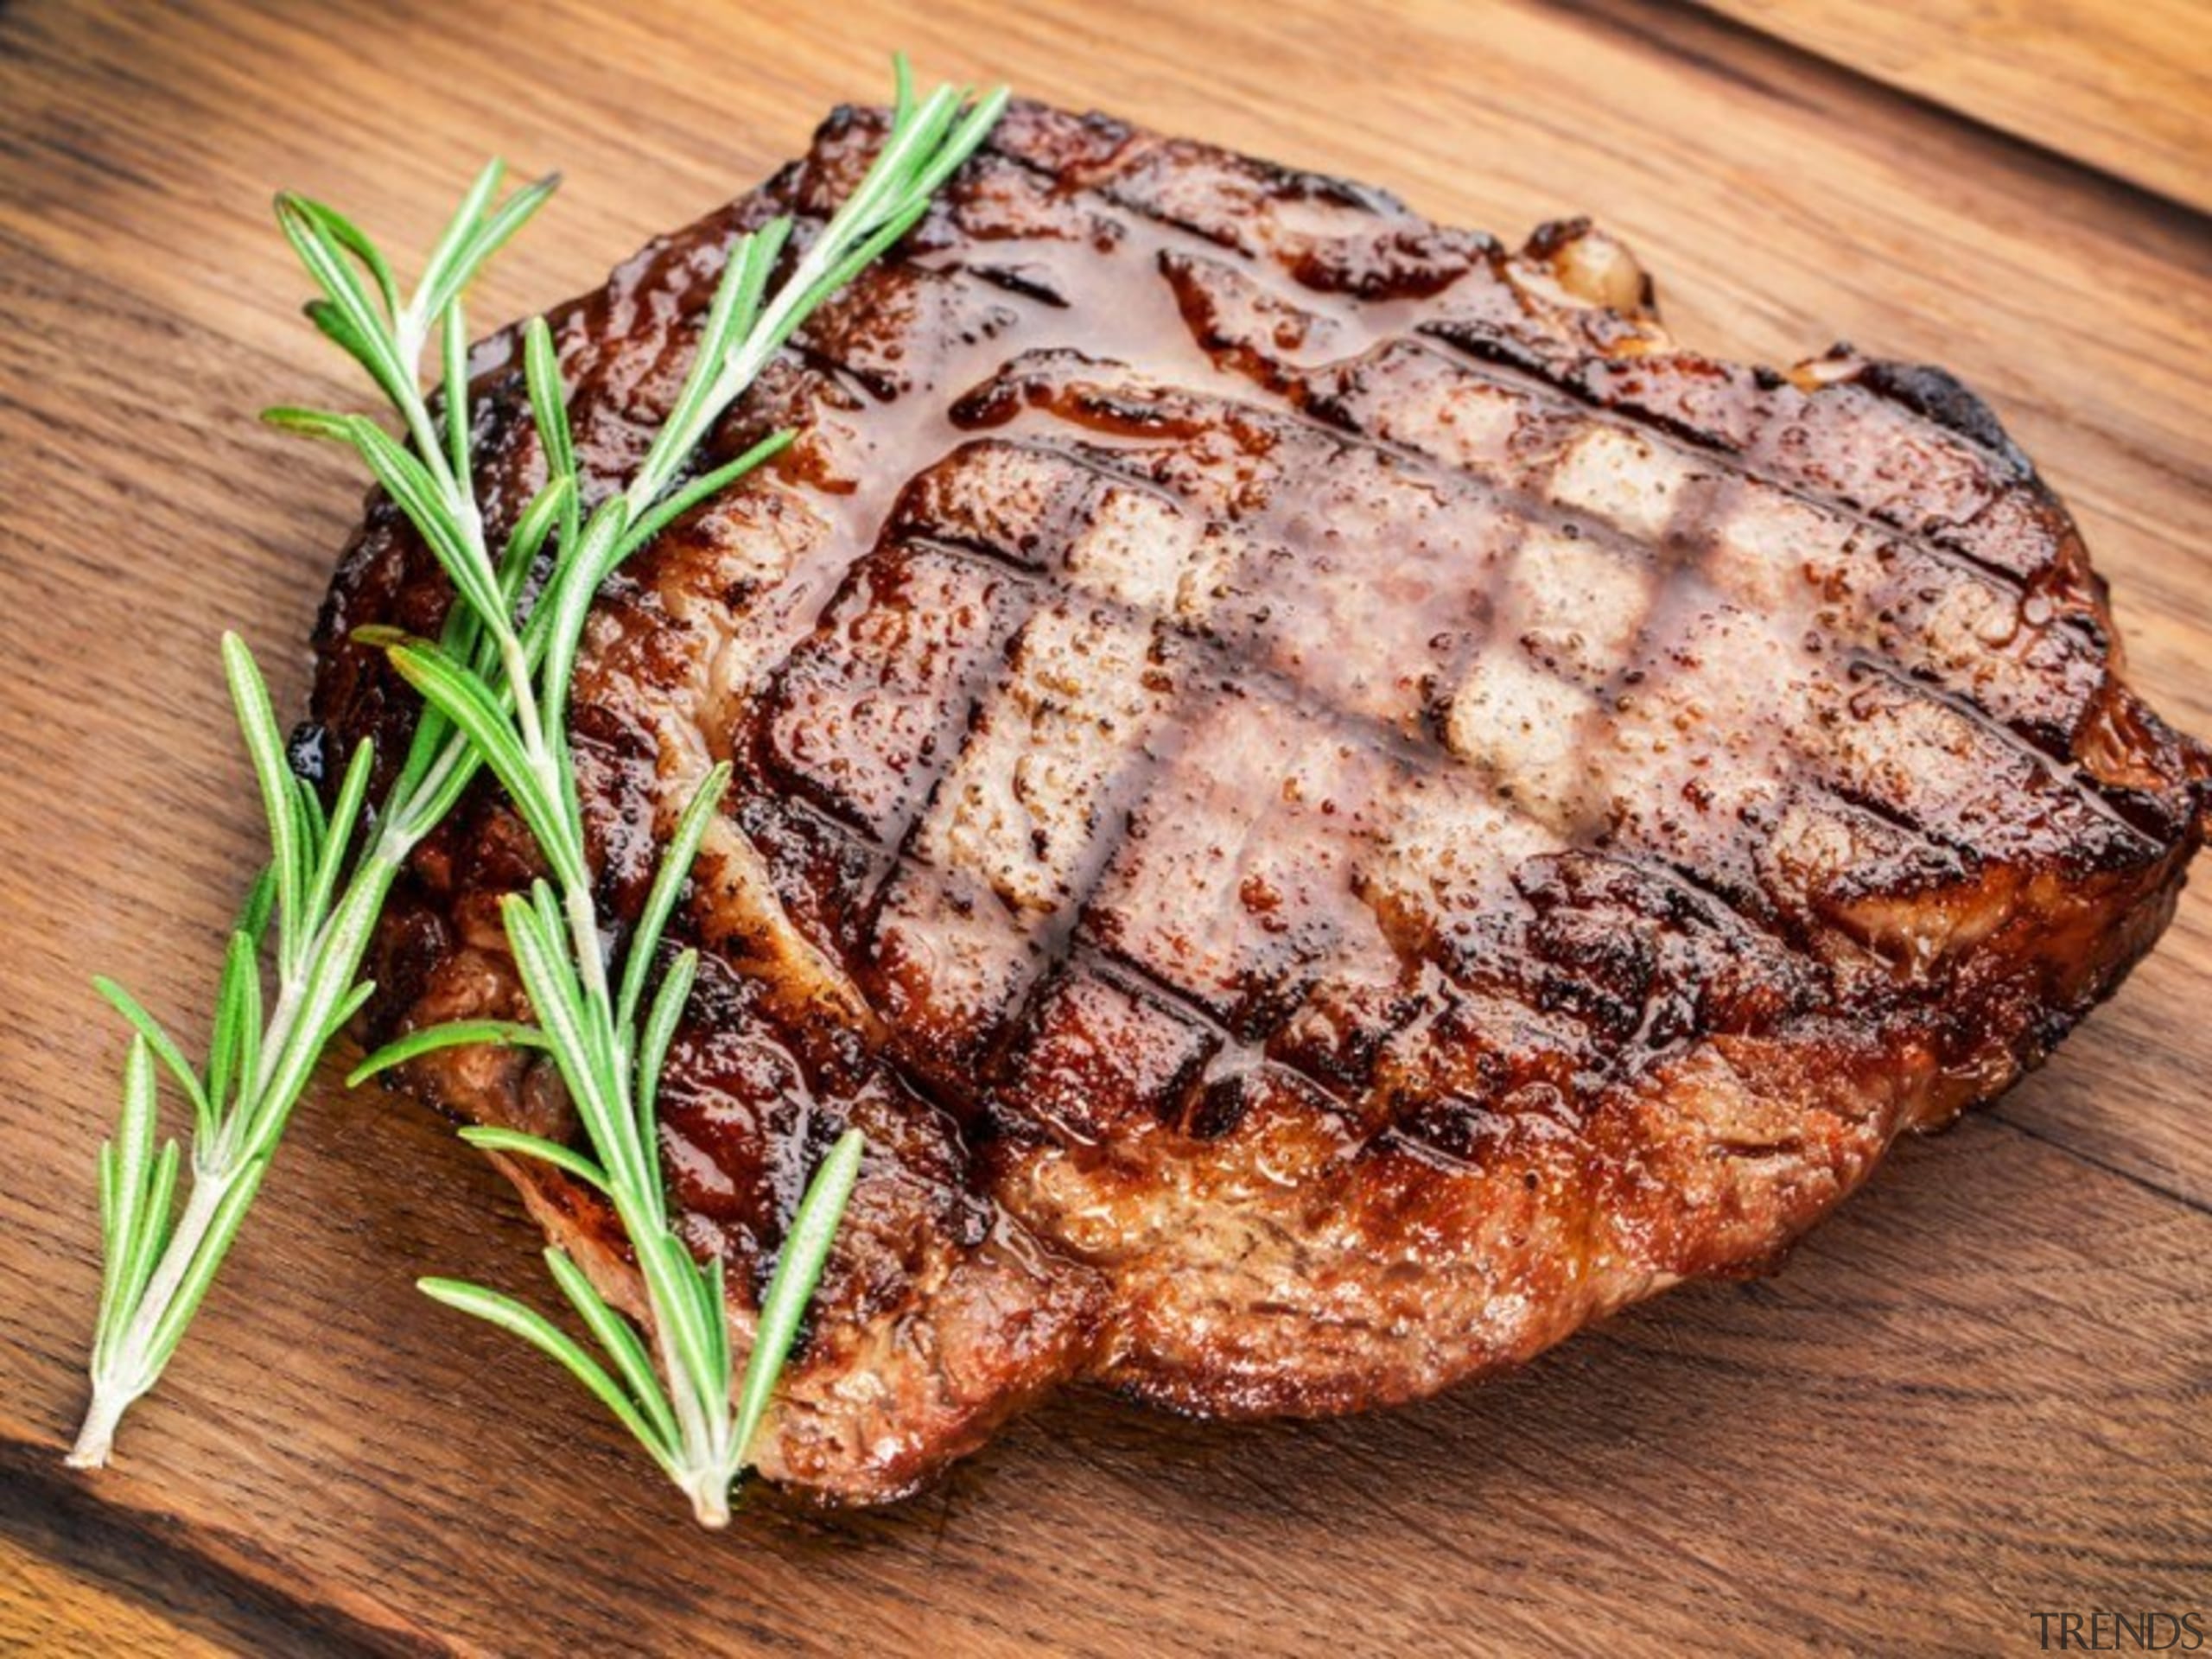 The Perfect Steak – Broil King - animal animal source foods, beef, beef tenderloin, flat iron steak, food, grillades, lamb and mutton, meat, meat chop, pork chop, pork steak, red meat, rib eye steak, roast beef, roasting, sirloin steak, steak, orange